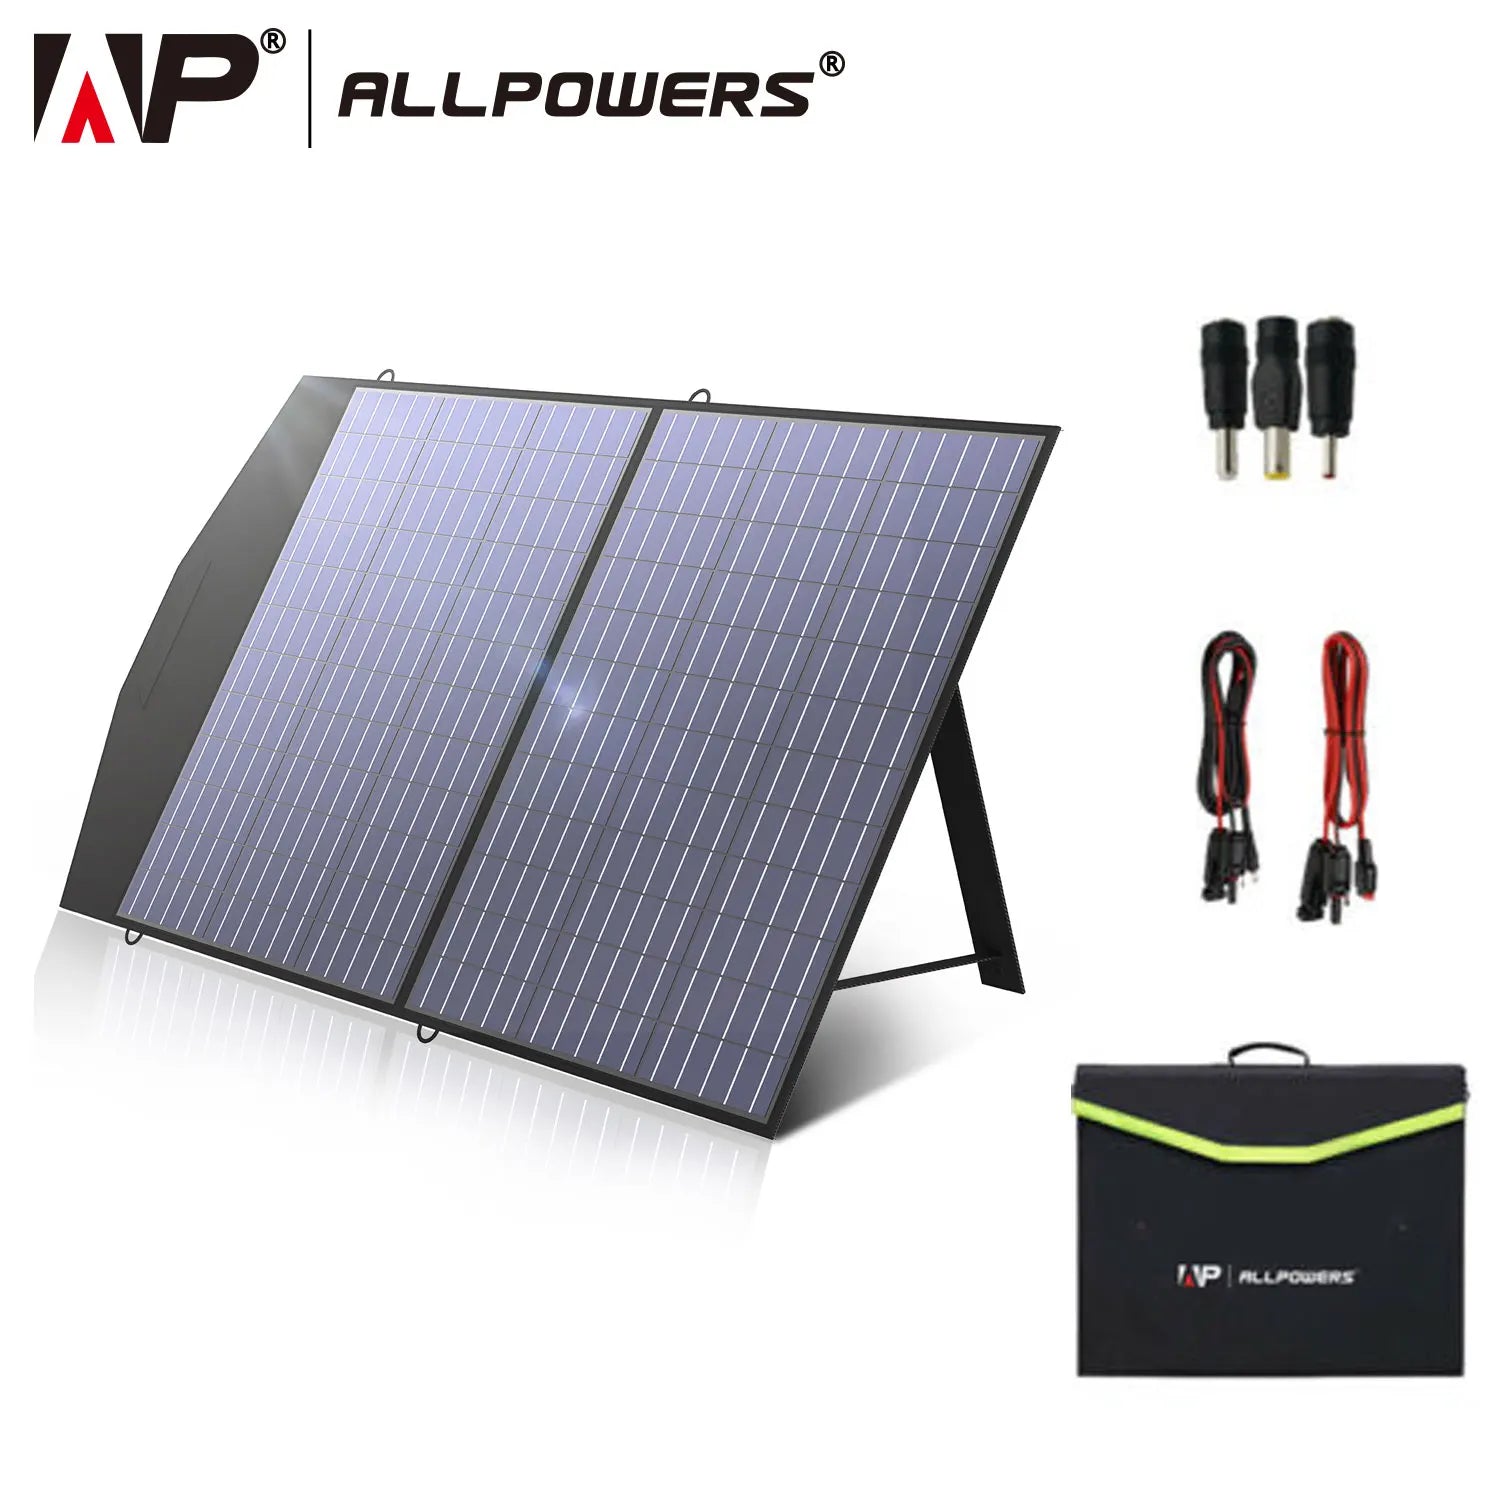 ALLPOWERS 18V Foldable Solar Panel, Folding solar charger for outdoor gear, motorhomes, and gardens with 20A max output.